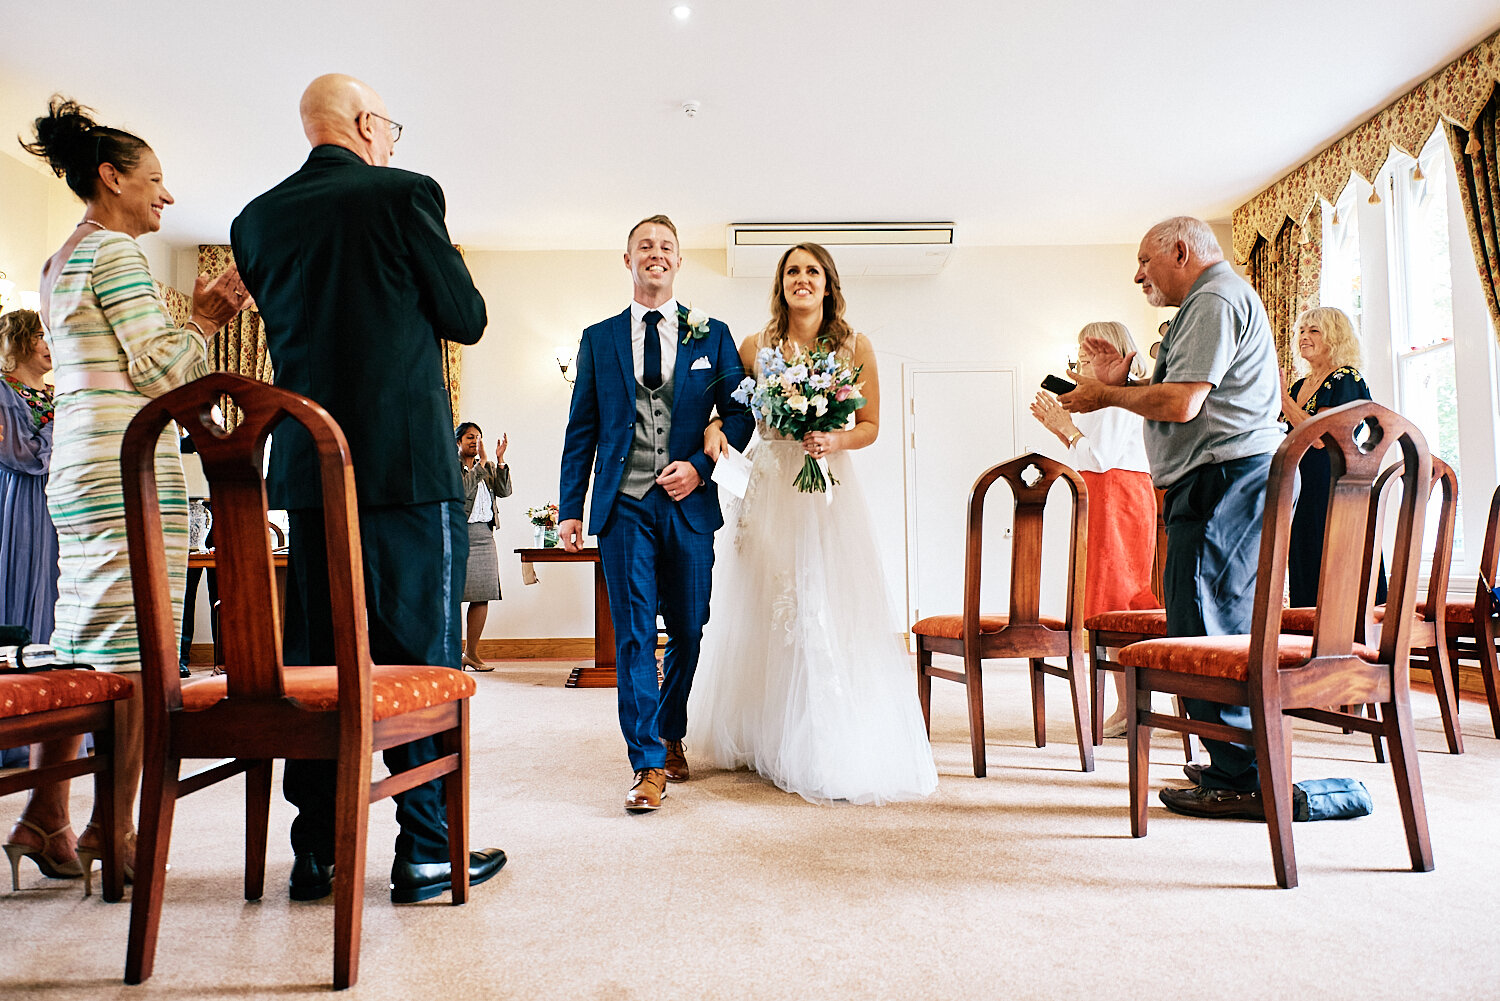 SMALL-wedding-photography-st-albans-registry-office-pike-photography_67.jpg